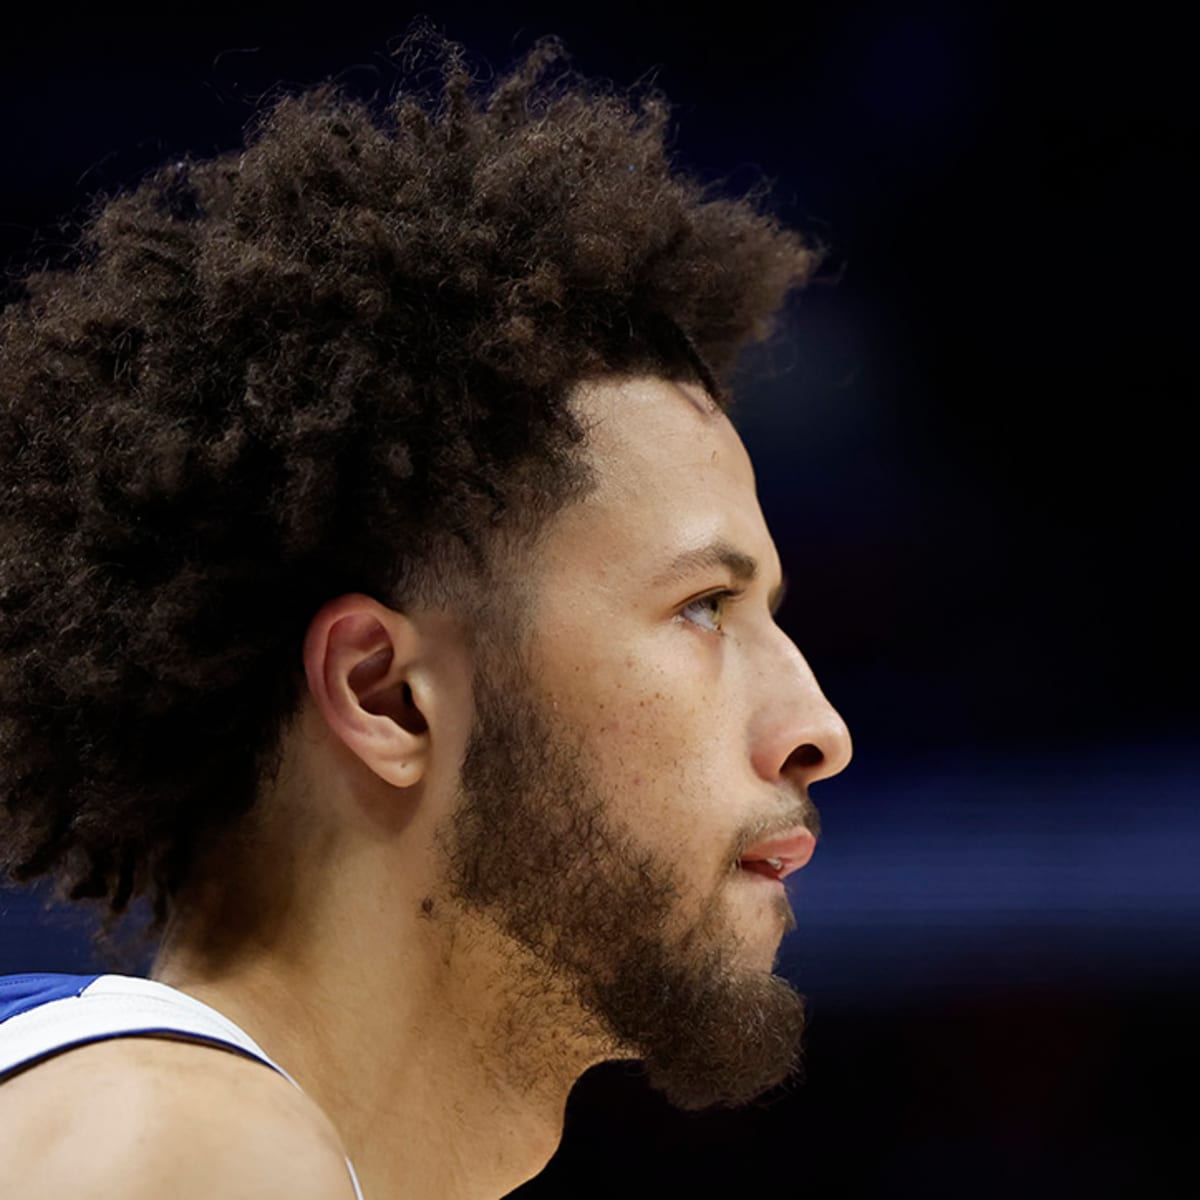 Cade Cunningham Post-Surgery: 'I Still Haven't Shown People Who I Am